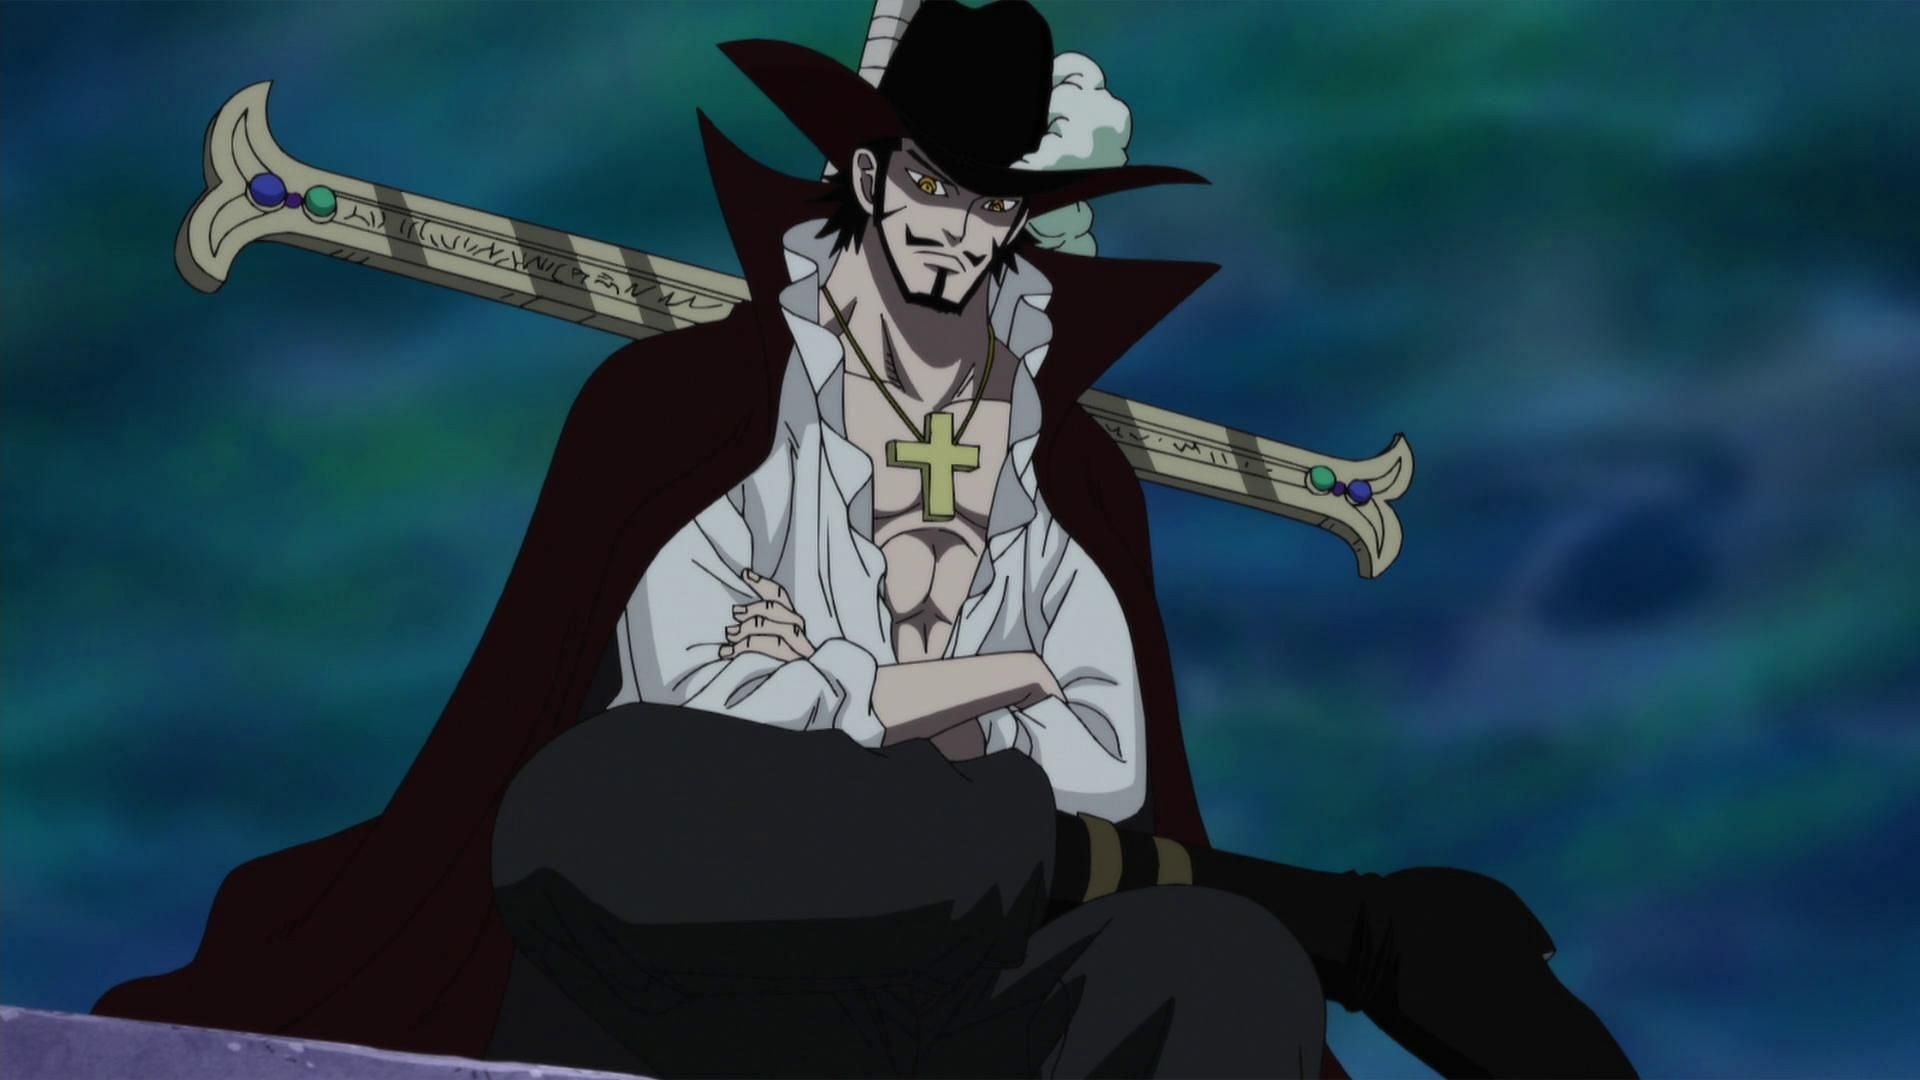 Mihawk as seen in the show (Image via Toei Animation)